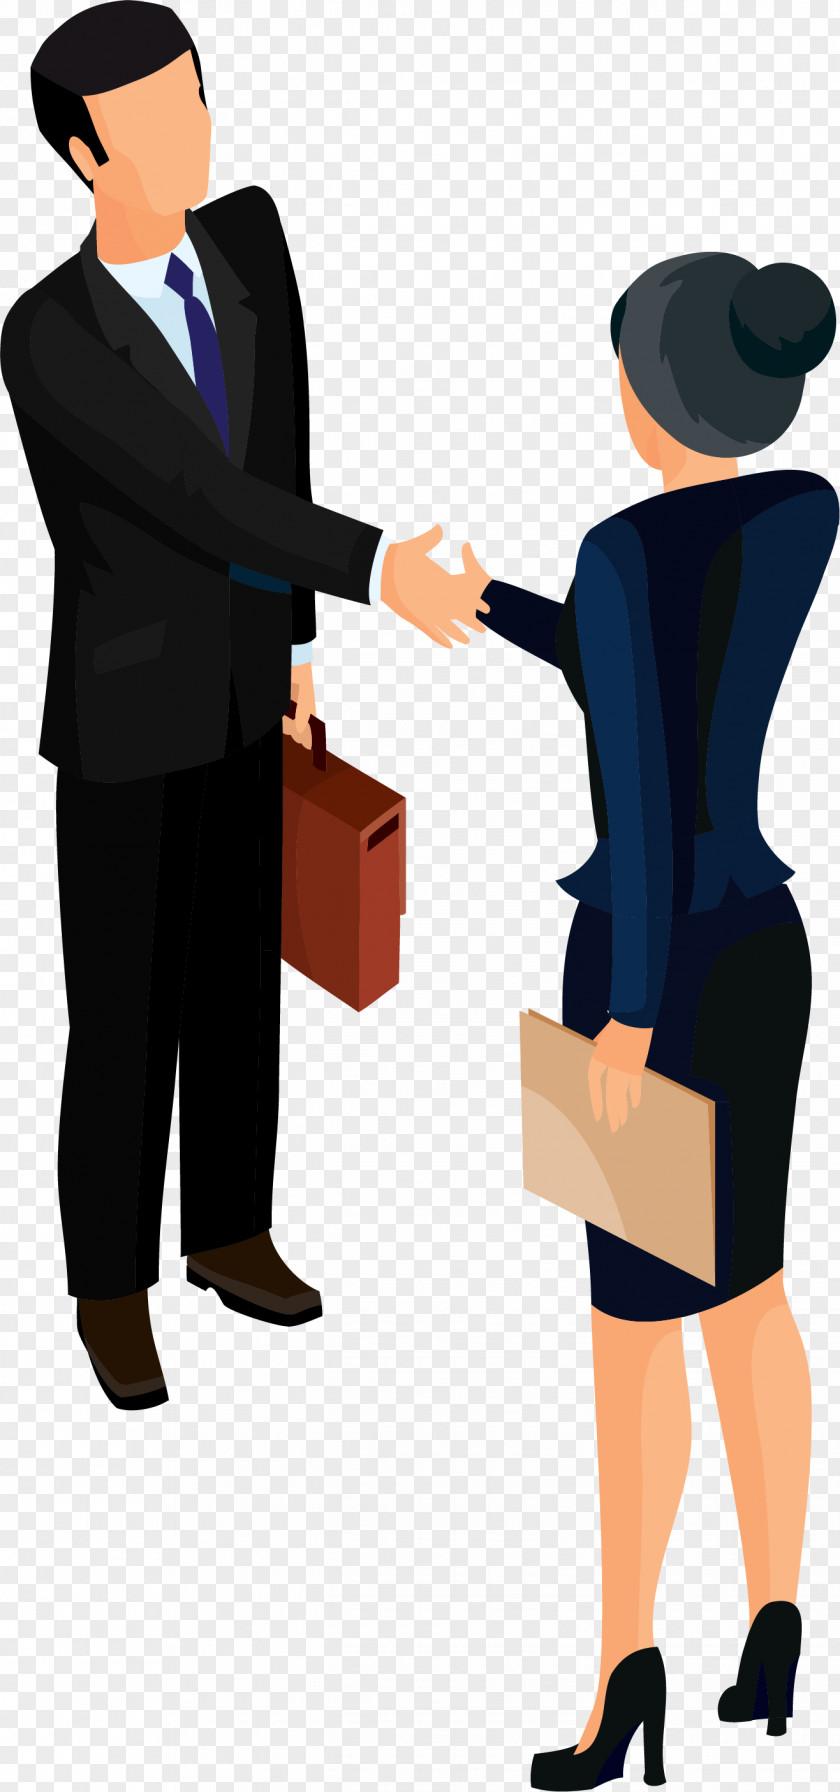 Cartoon Business People Shake Hands Businessperson Chess 2017 Illustration PNG